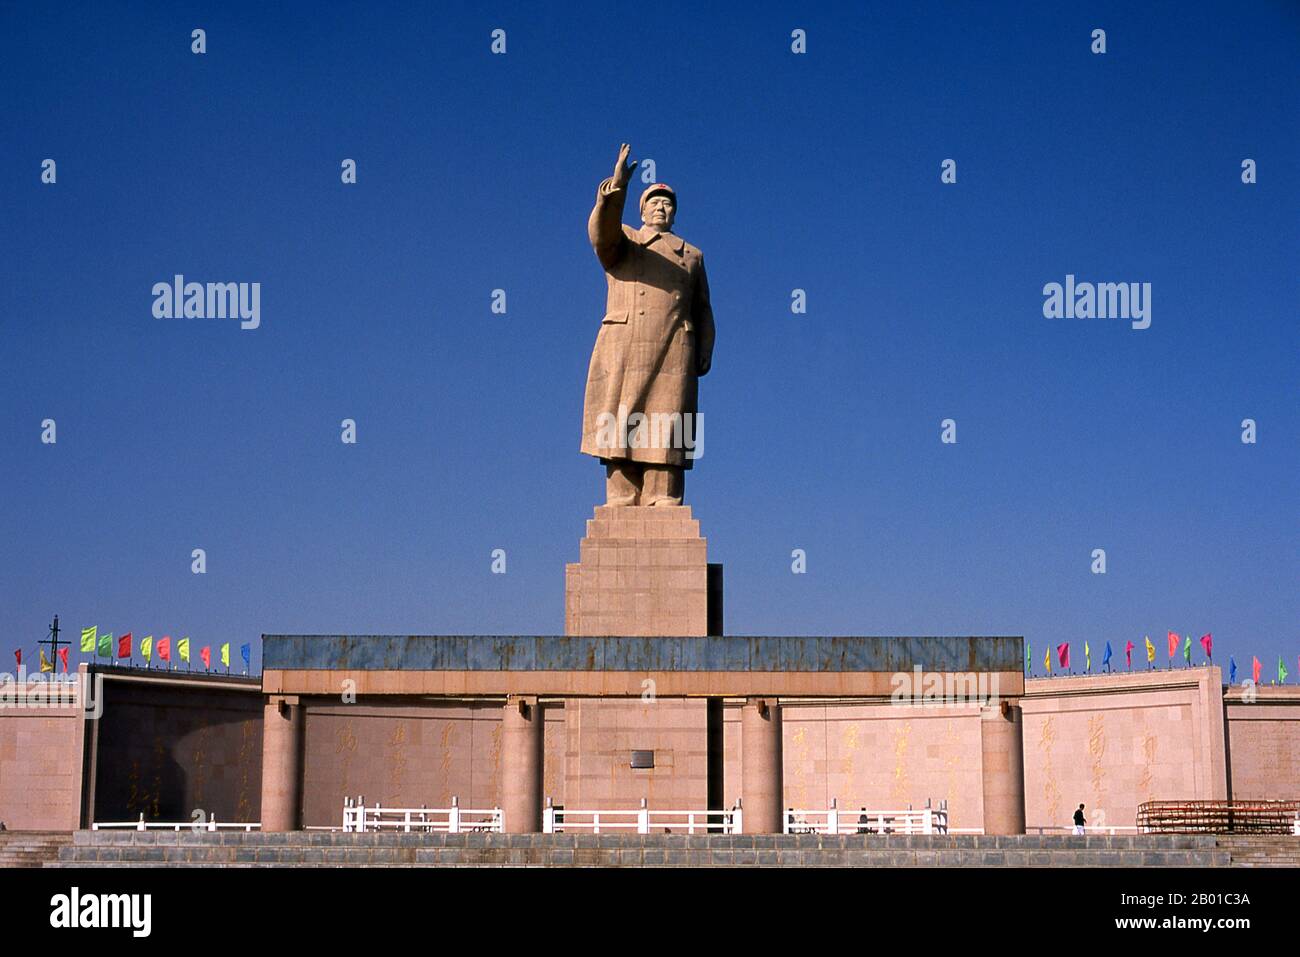 China: Statue of Mao Zedong (26 December 1893 - 9 September 1976) Chairman of the People's Republic of China, Kashgar, Xinjiang Province.  Mao Zedong, also transliterated as Mao Tse-tung, was a Chinese communist revolutionary, guerrilla warfare strategist, author, political theorist and leader of the Chinese Revolution.  Commonly referred to as Chairman Mao, he was the architect of the People's Republic of China (PRC) from its establishment in 1949, and held authoritarian control over the nation until his death in 1976. Stock Photo